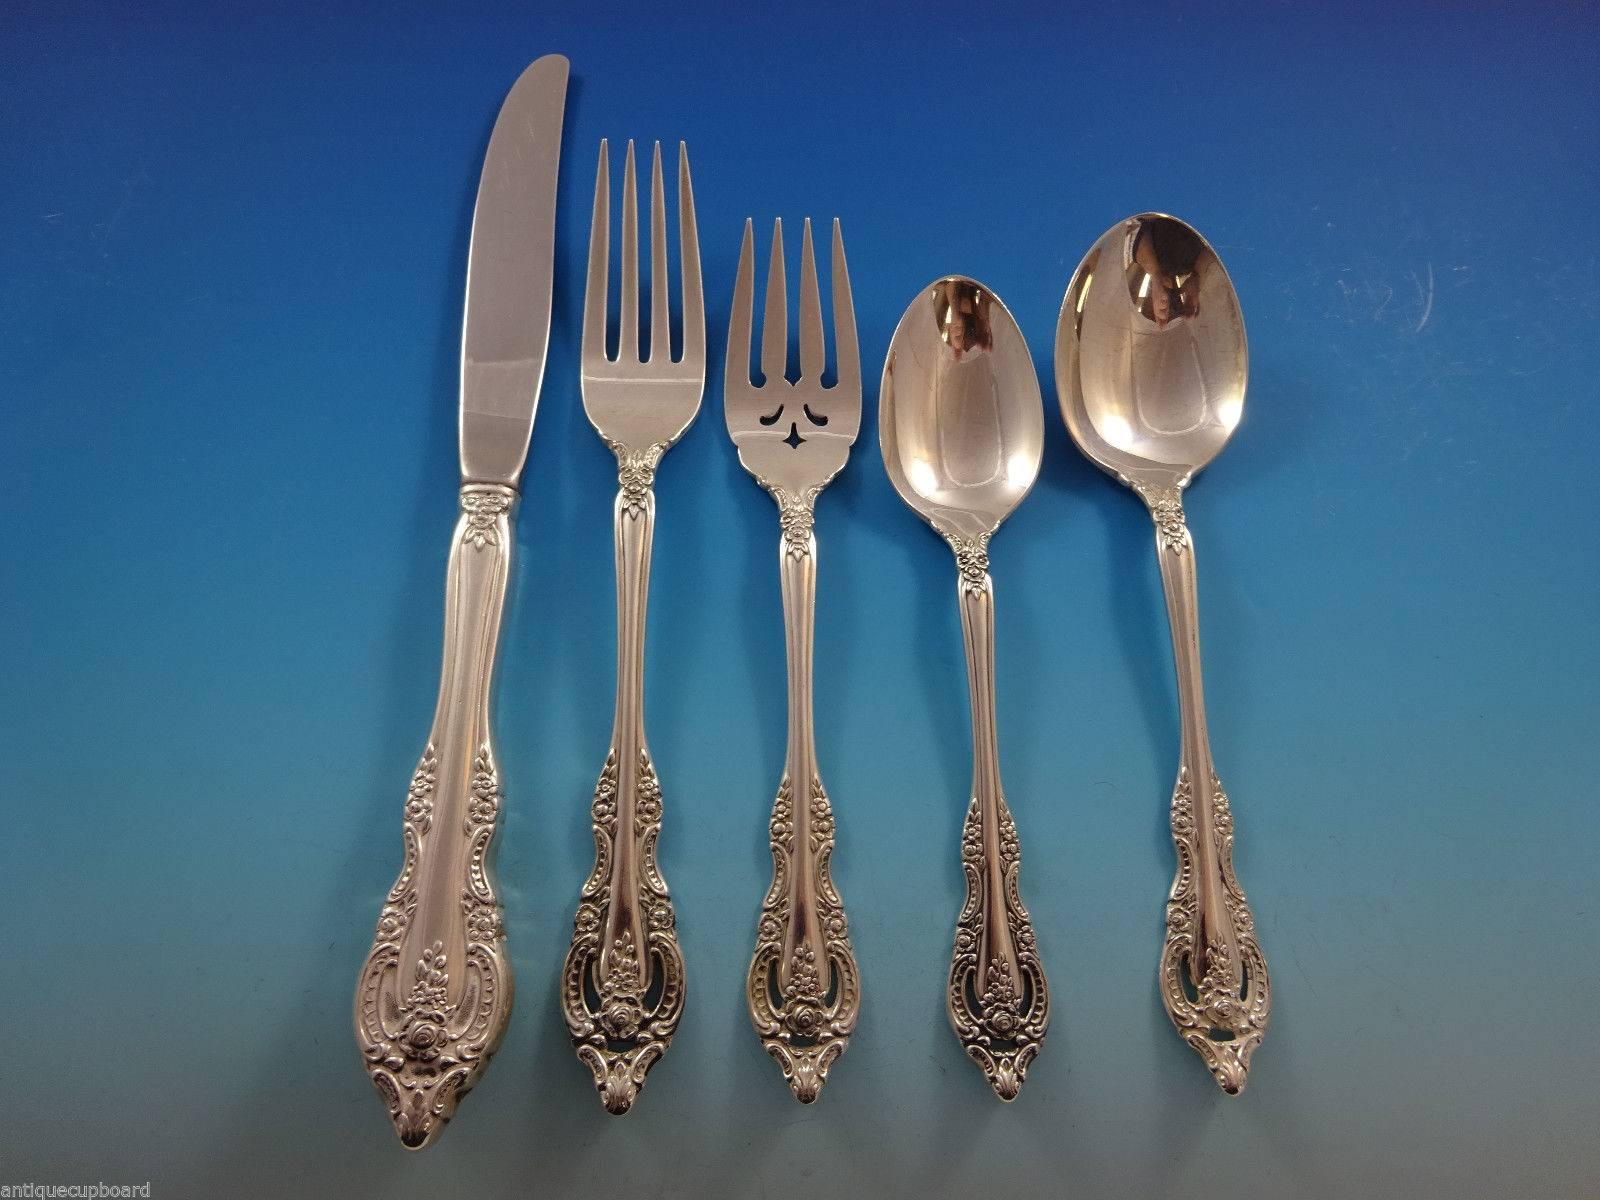 Mediterranea by Oneida sterling silver flatware set, 64 pieces. This set includes:

12 knives, 9 1/8